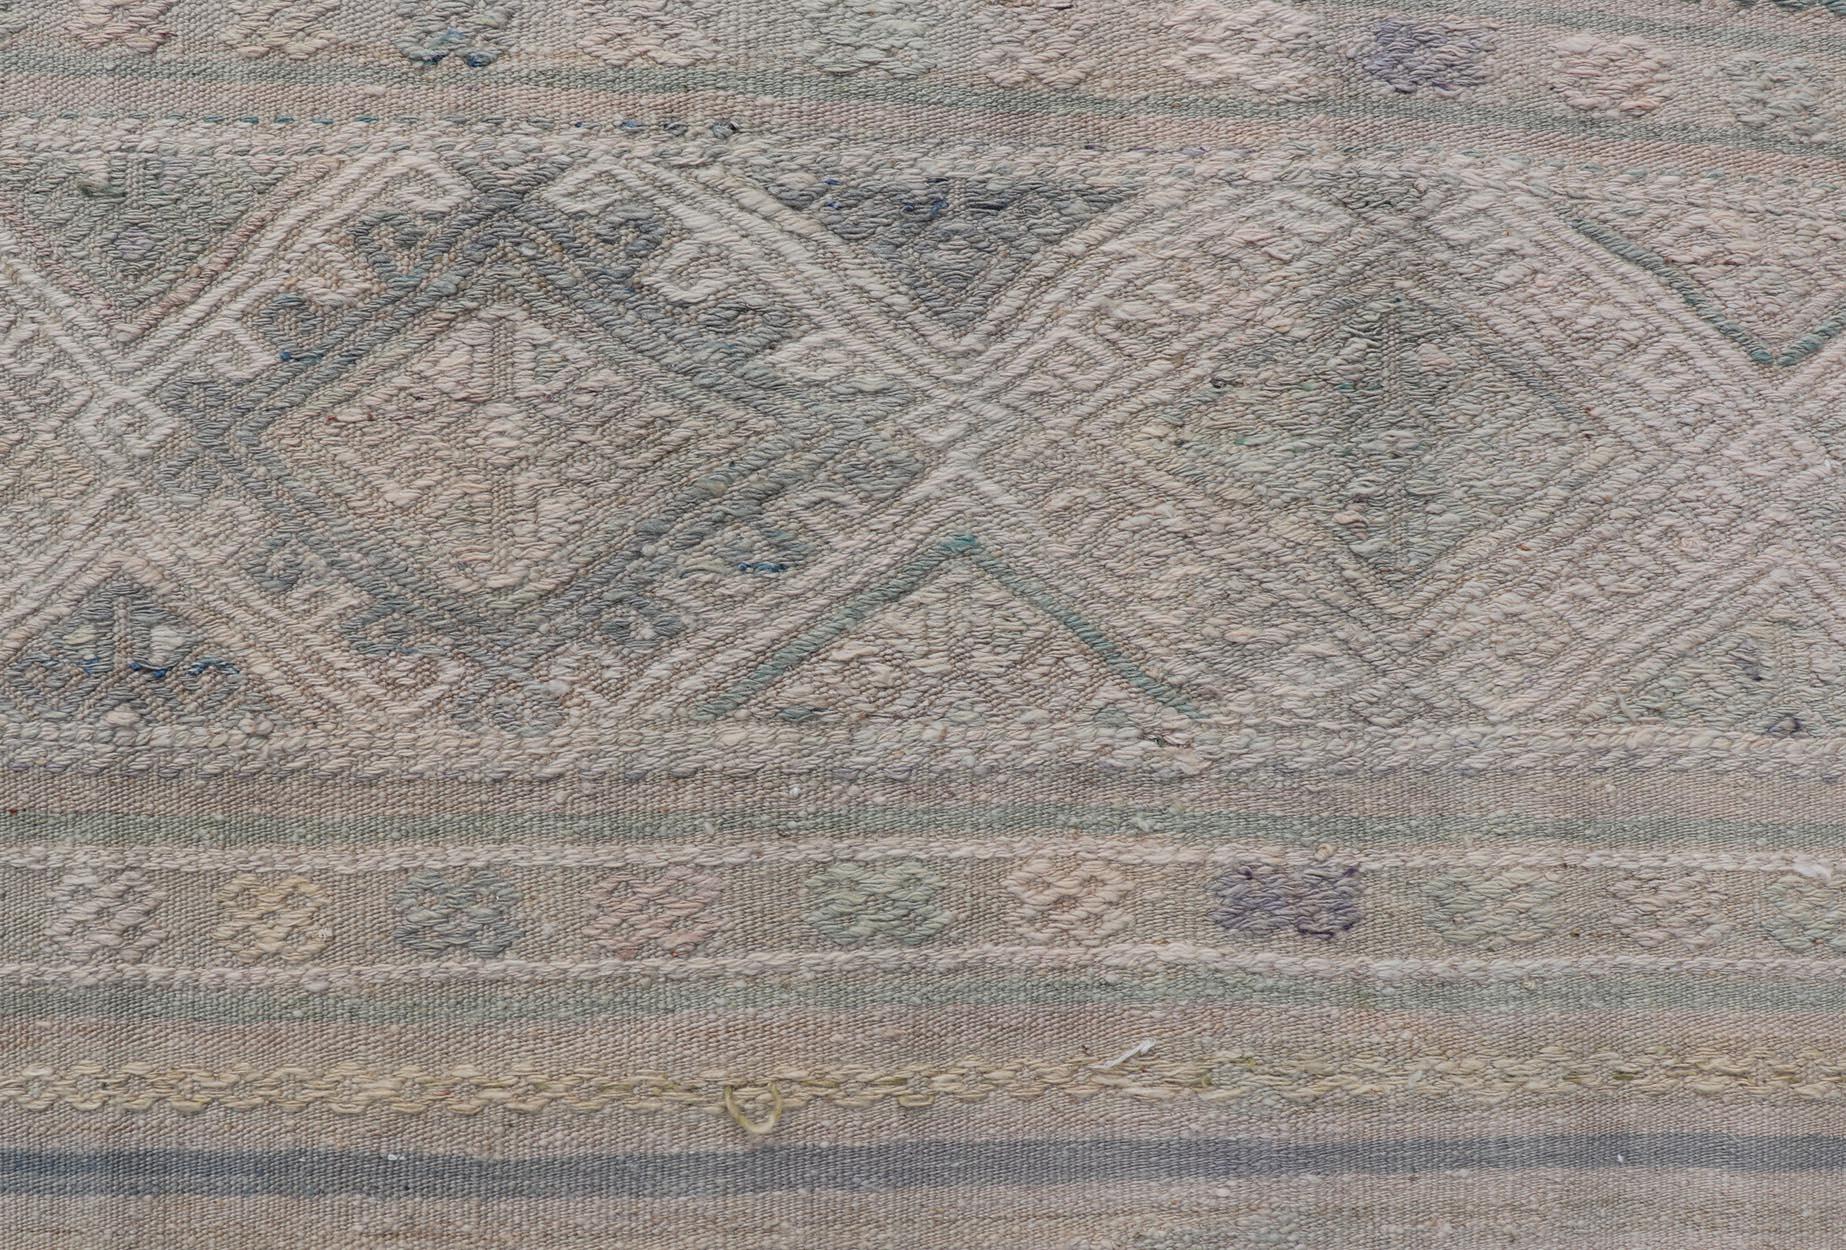 Vintage Turkish Flat-Weave Kilim with Stripes and Embroideries With Gray-Green For Sale 1